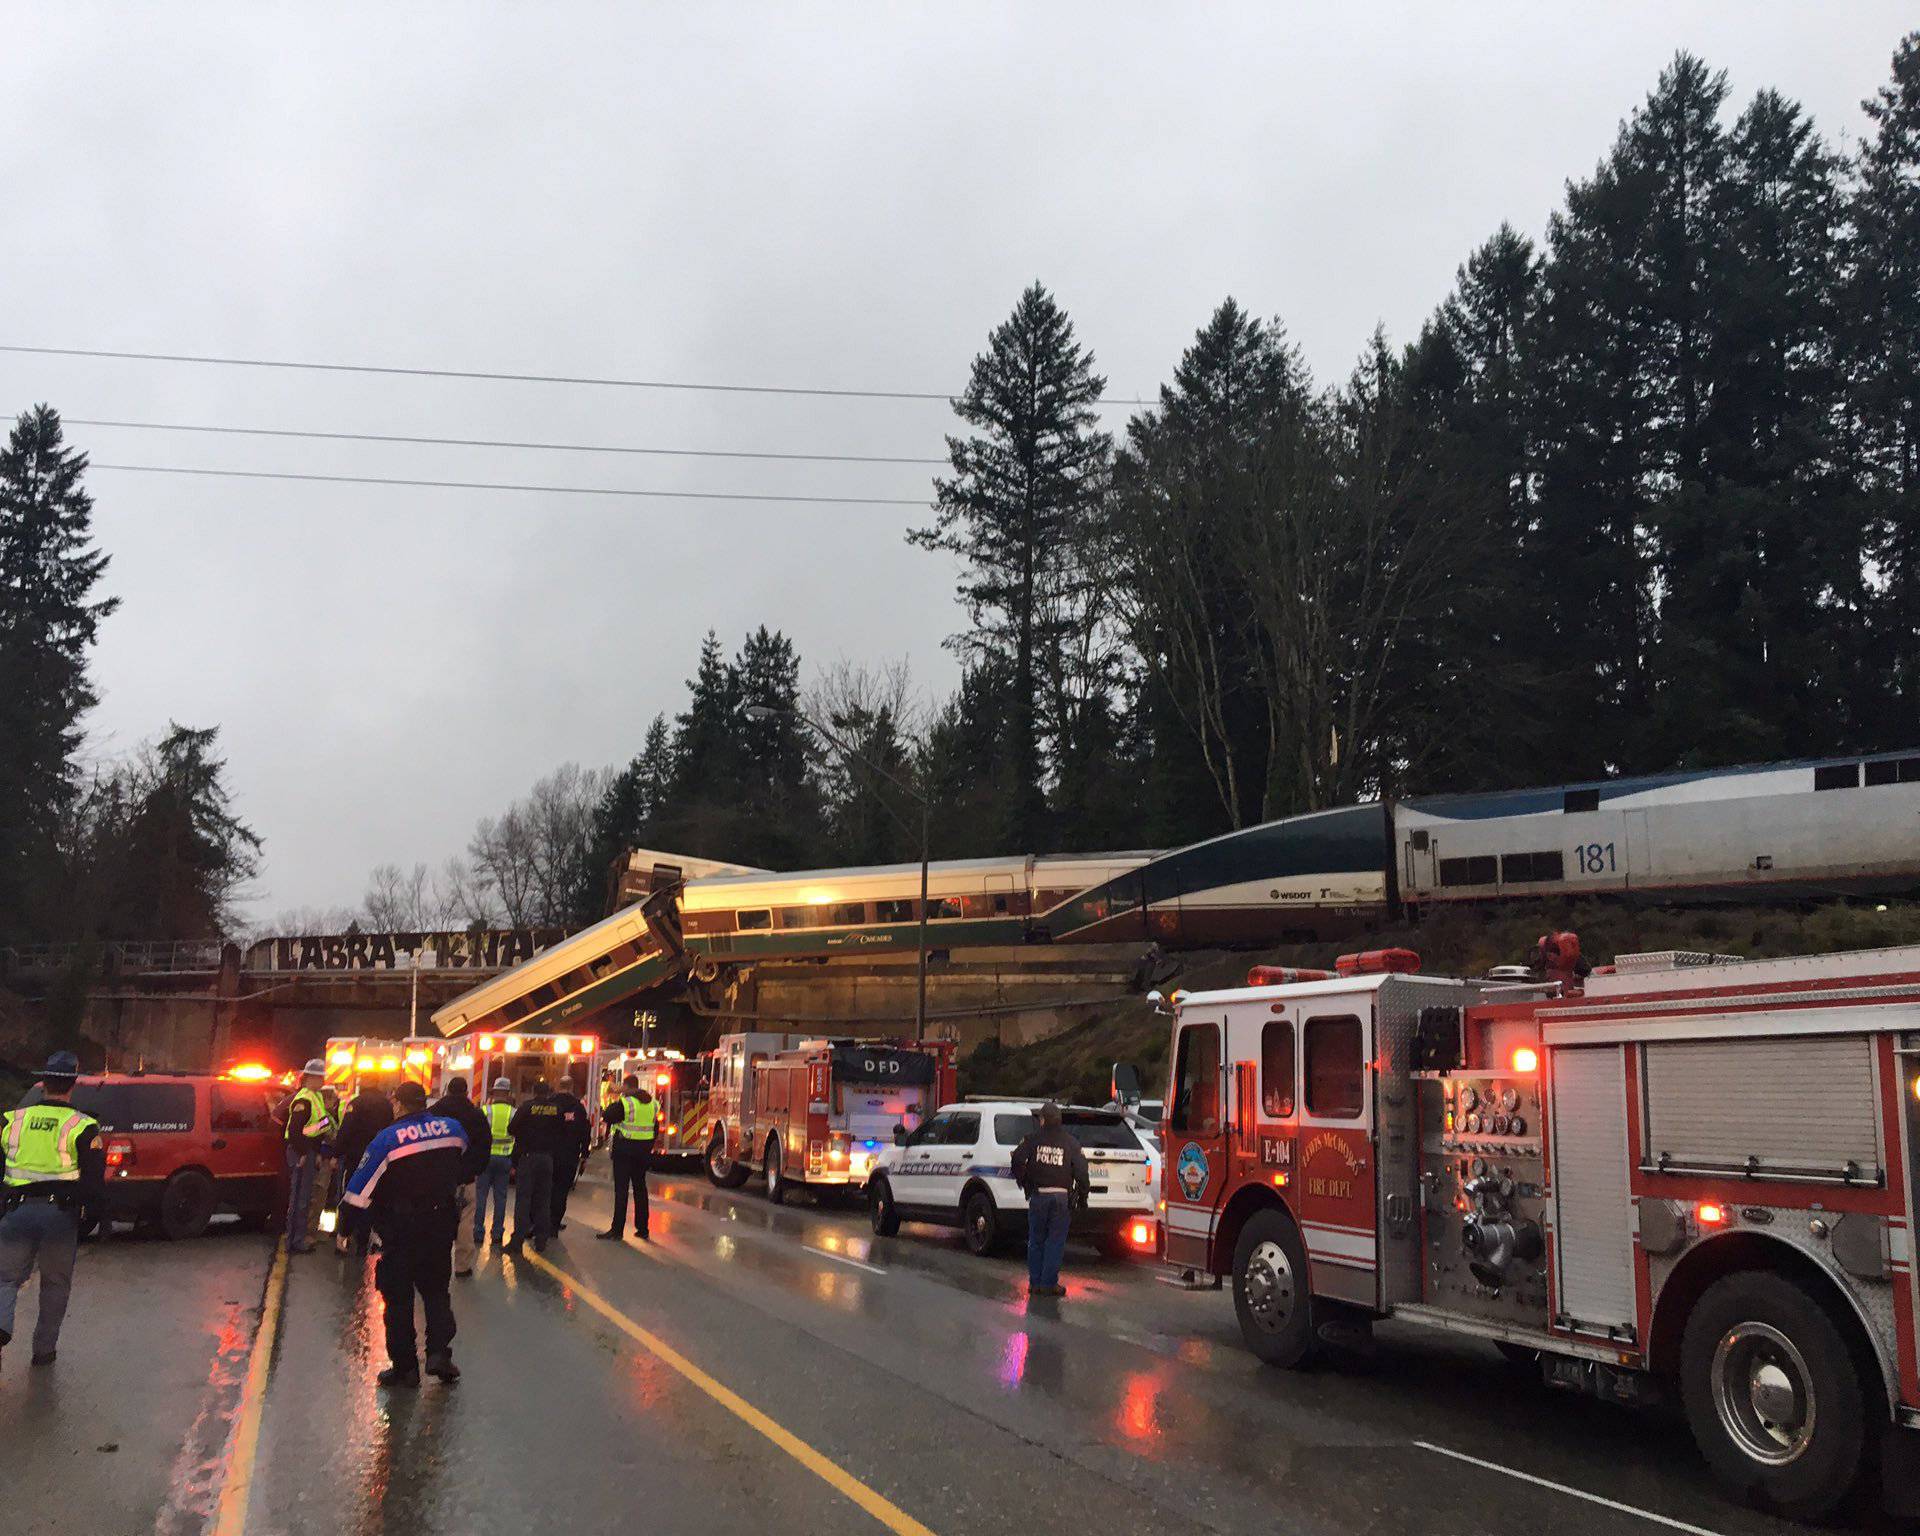 Washington State Patrol photo of first responders at the scene of an Amtrak passenger train derailment in DuPont